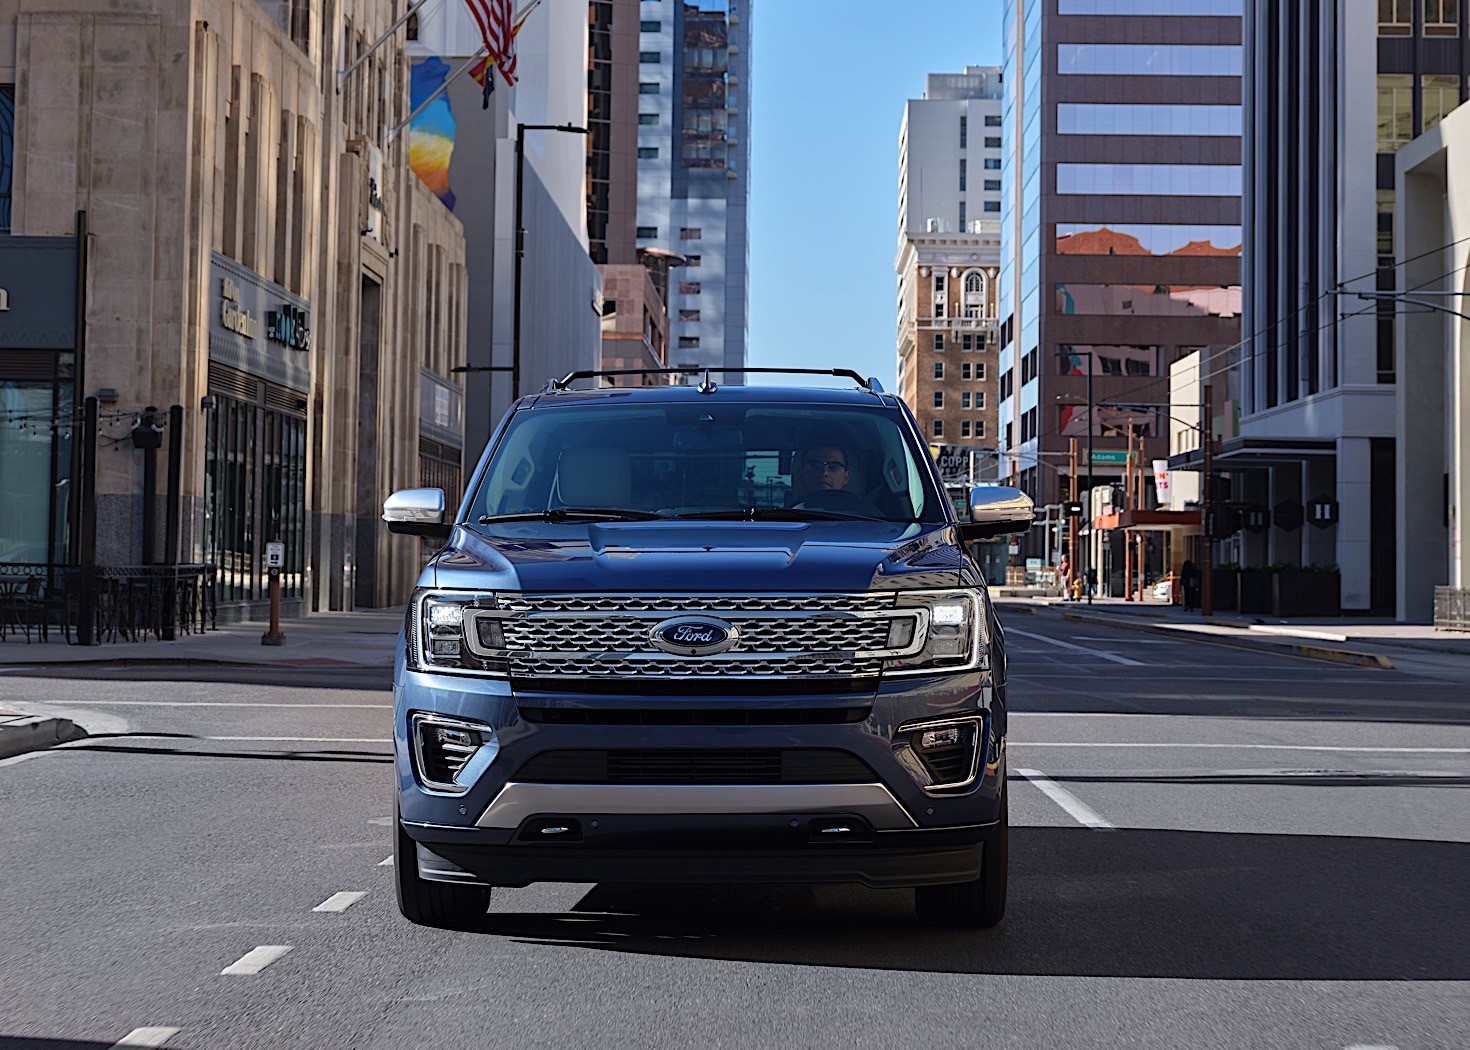 2020 Ford Expedition King Ranch Unveiled as Tribute to Texas Way of